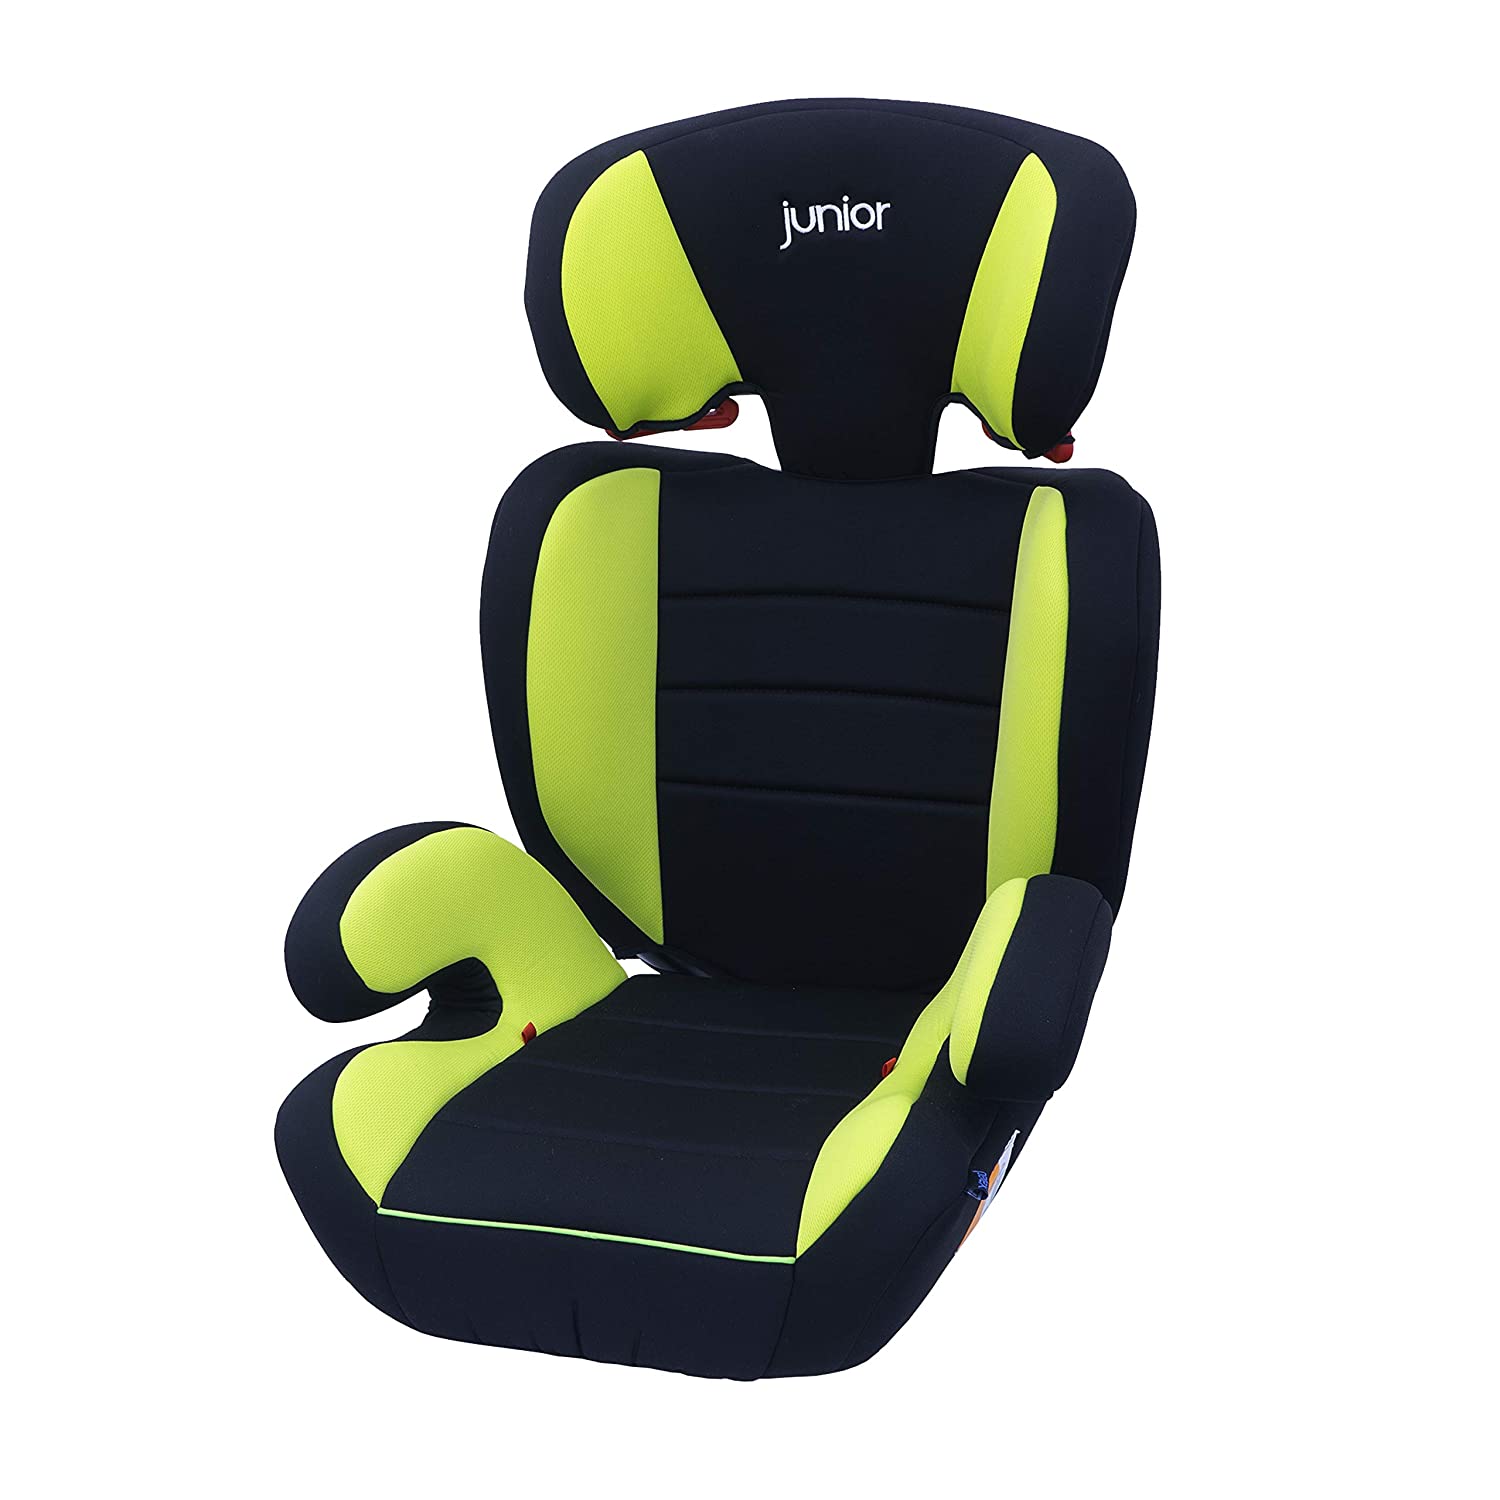 Petex Basic Child Car Seat, Group 2 / 3, According to ECE R44/04